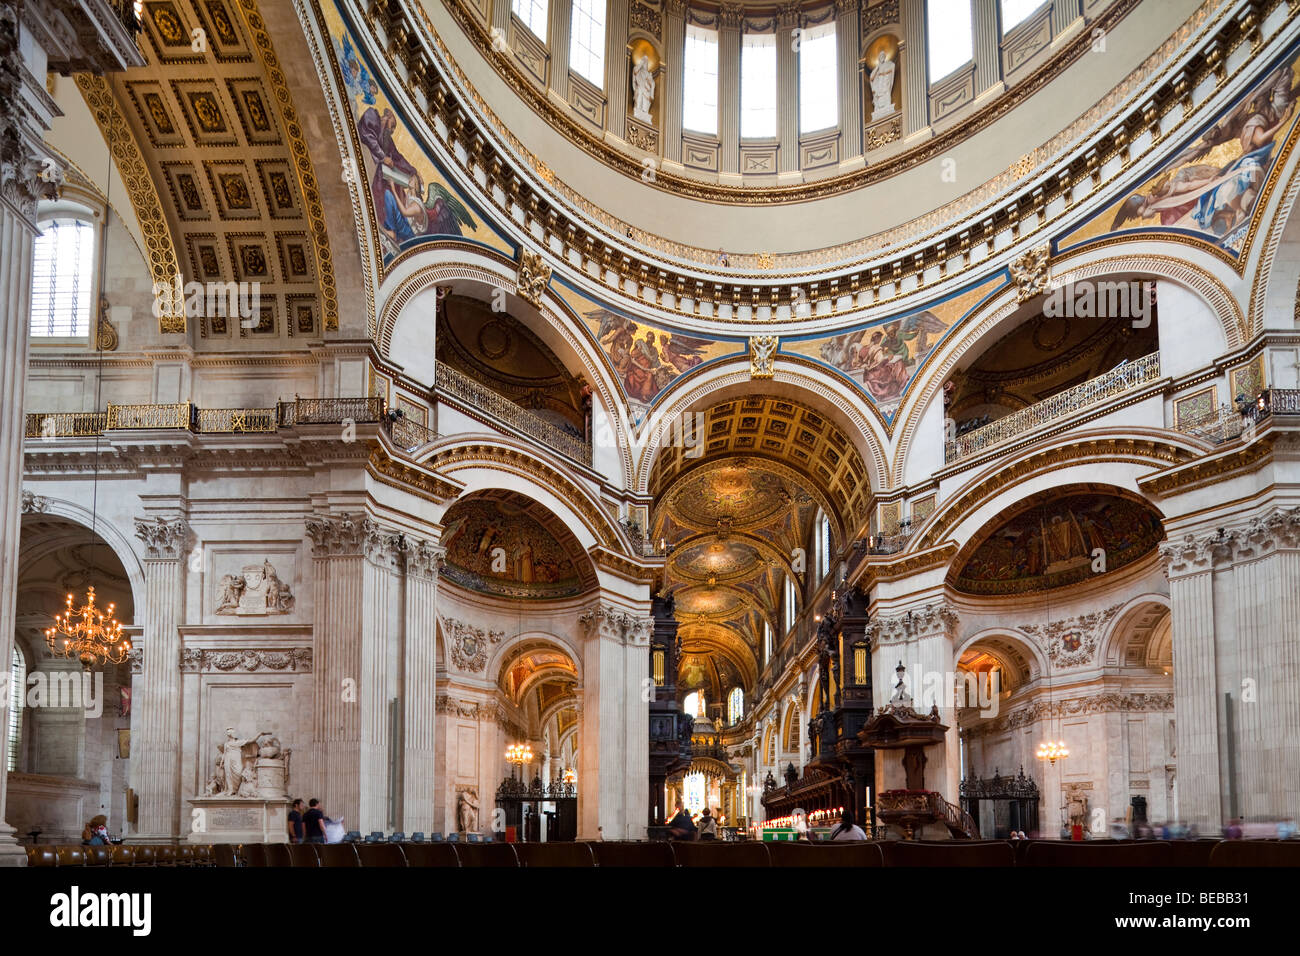 Interieur, St. Pauls Cathedral, London, England, UK Stockfoto